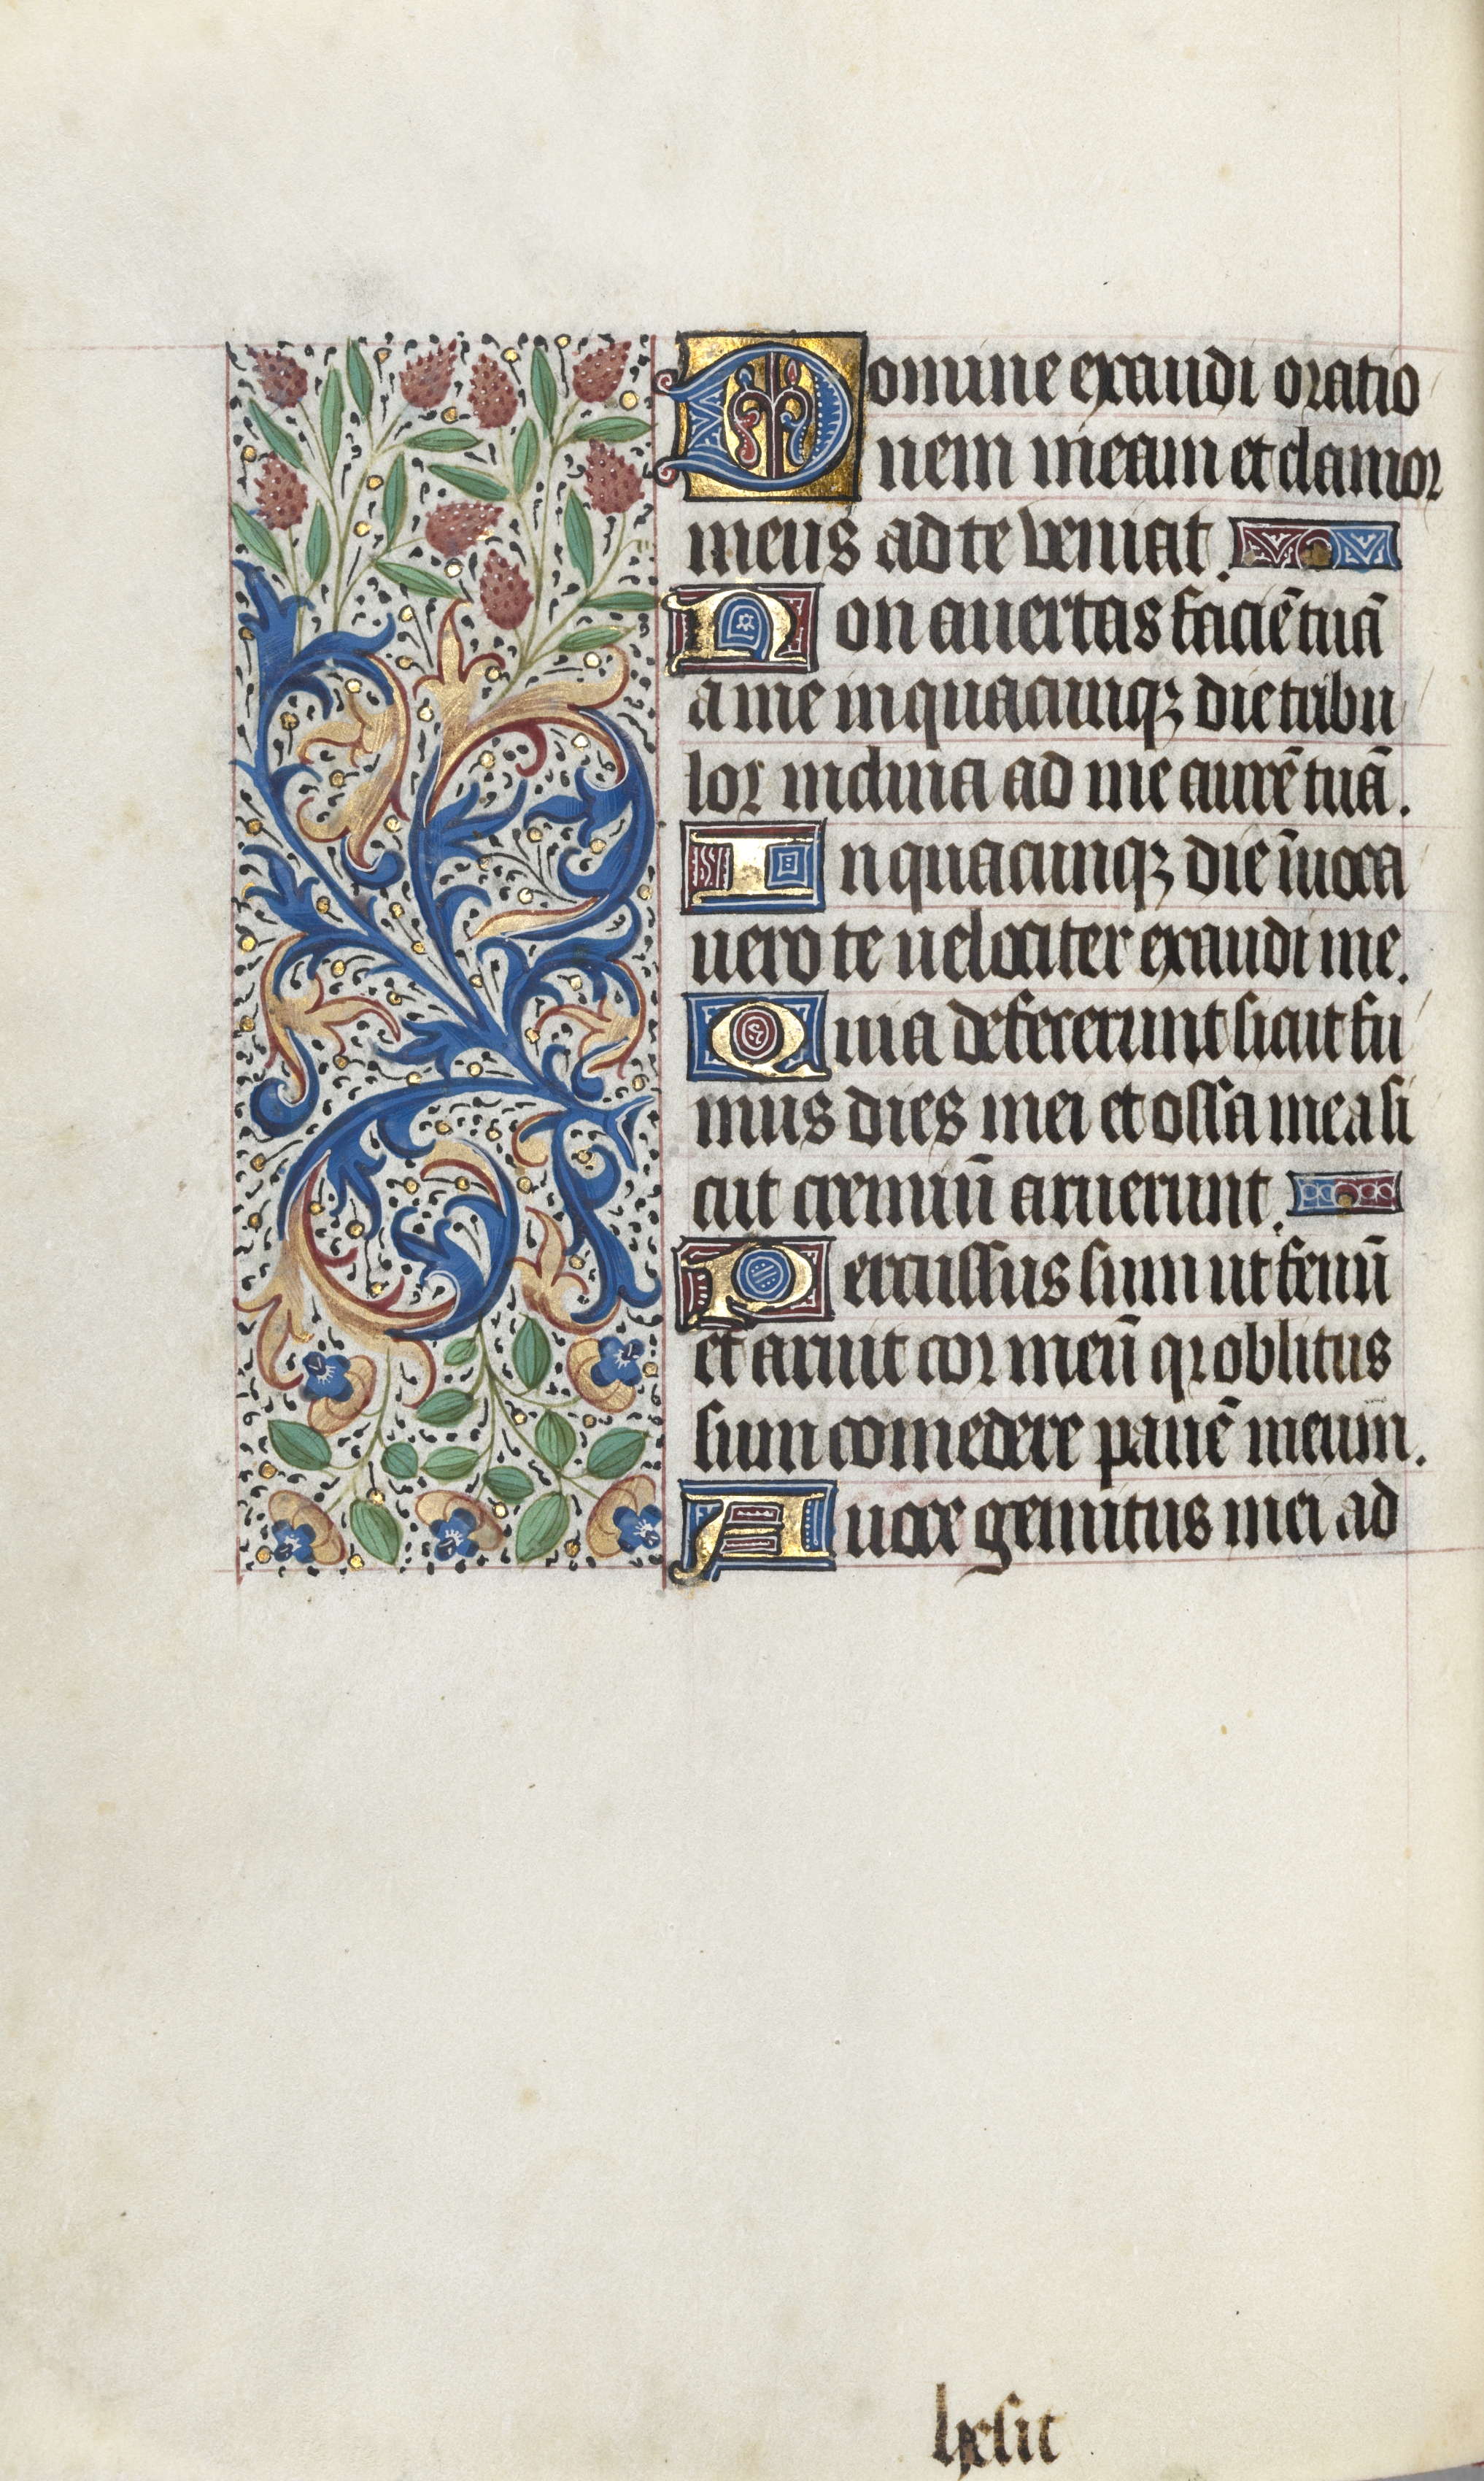 Book of Hours (Use of Rouen): fol. 87v